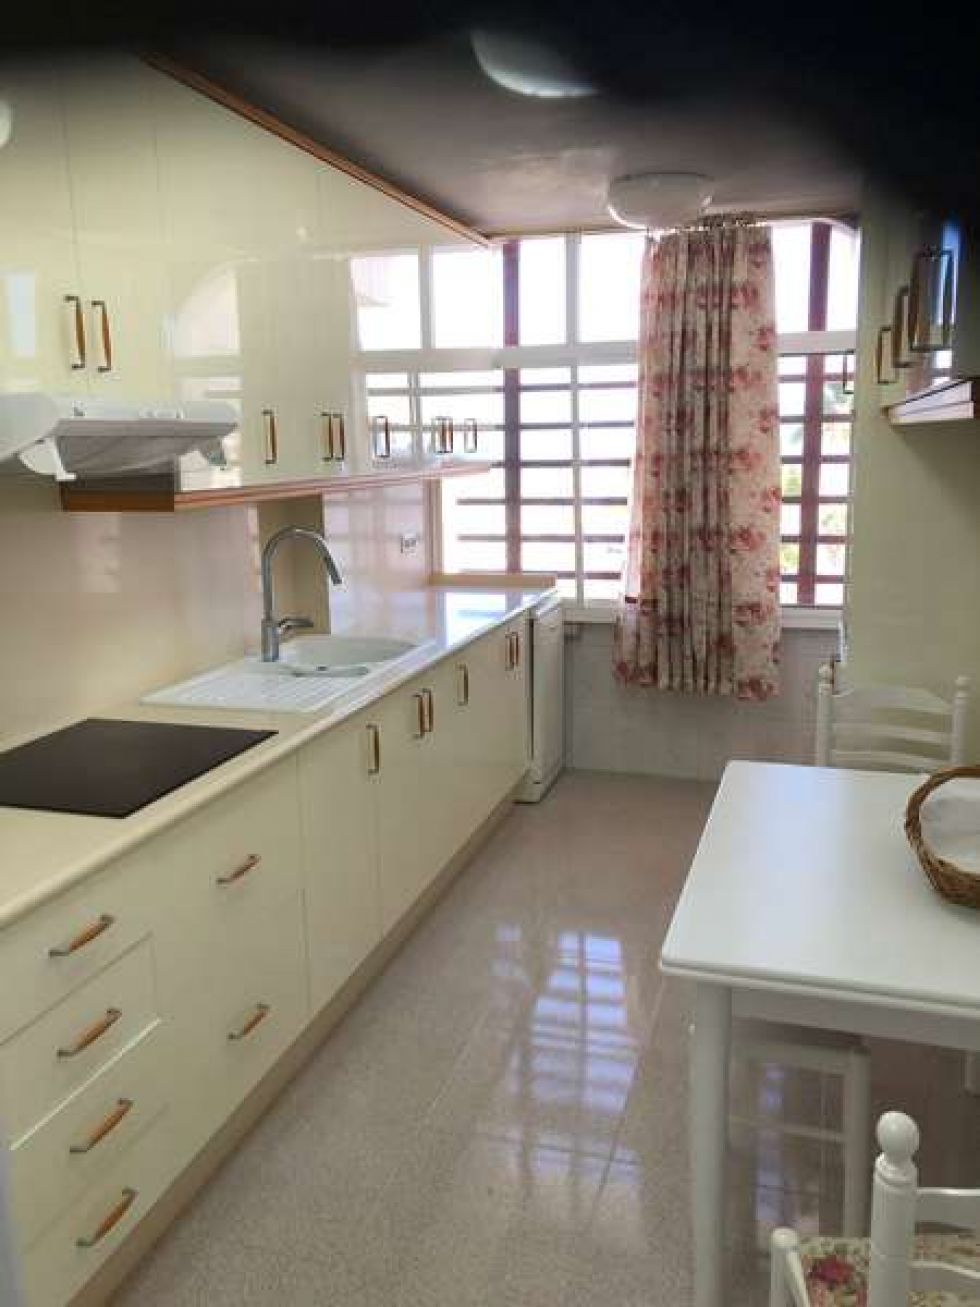 Penthouse for sale in  Cho, Spain - TRC-1141